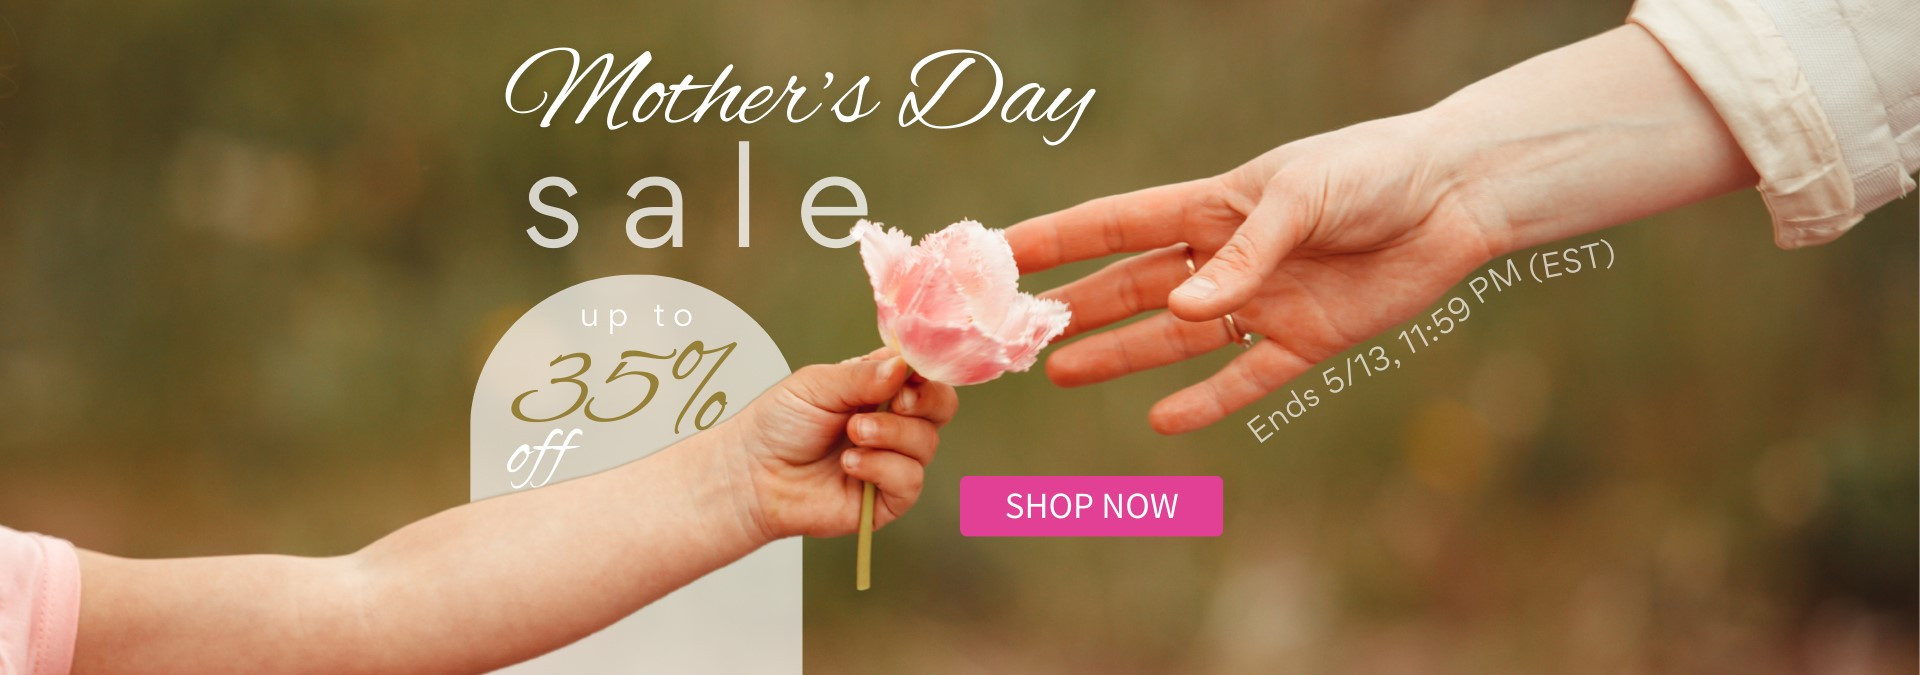 Mother's Day Sale, special discounts up to 35% off.